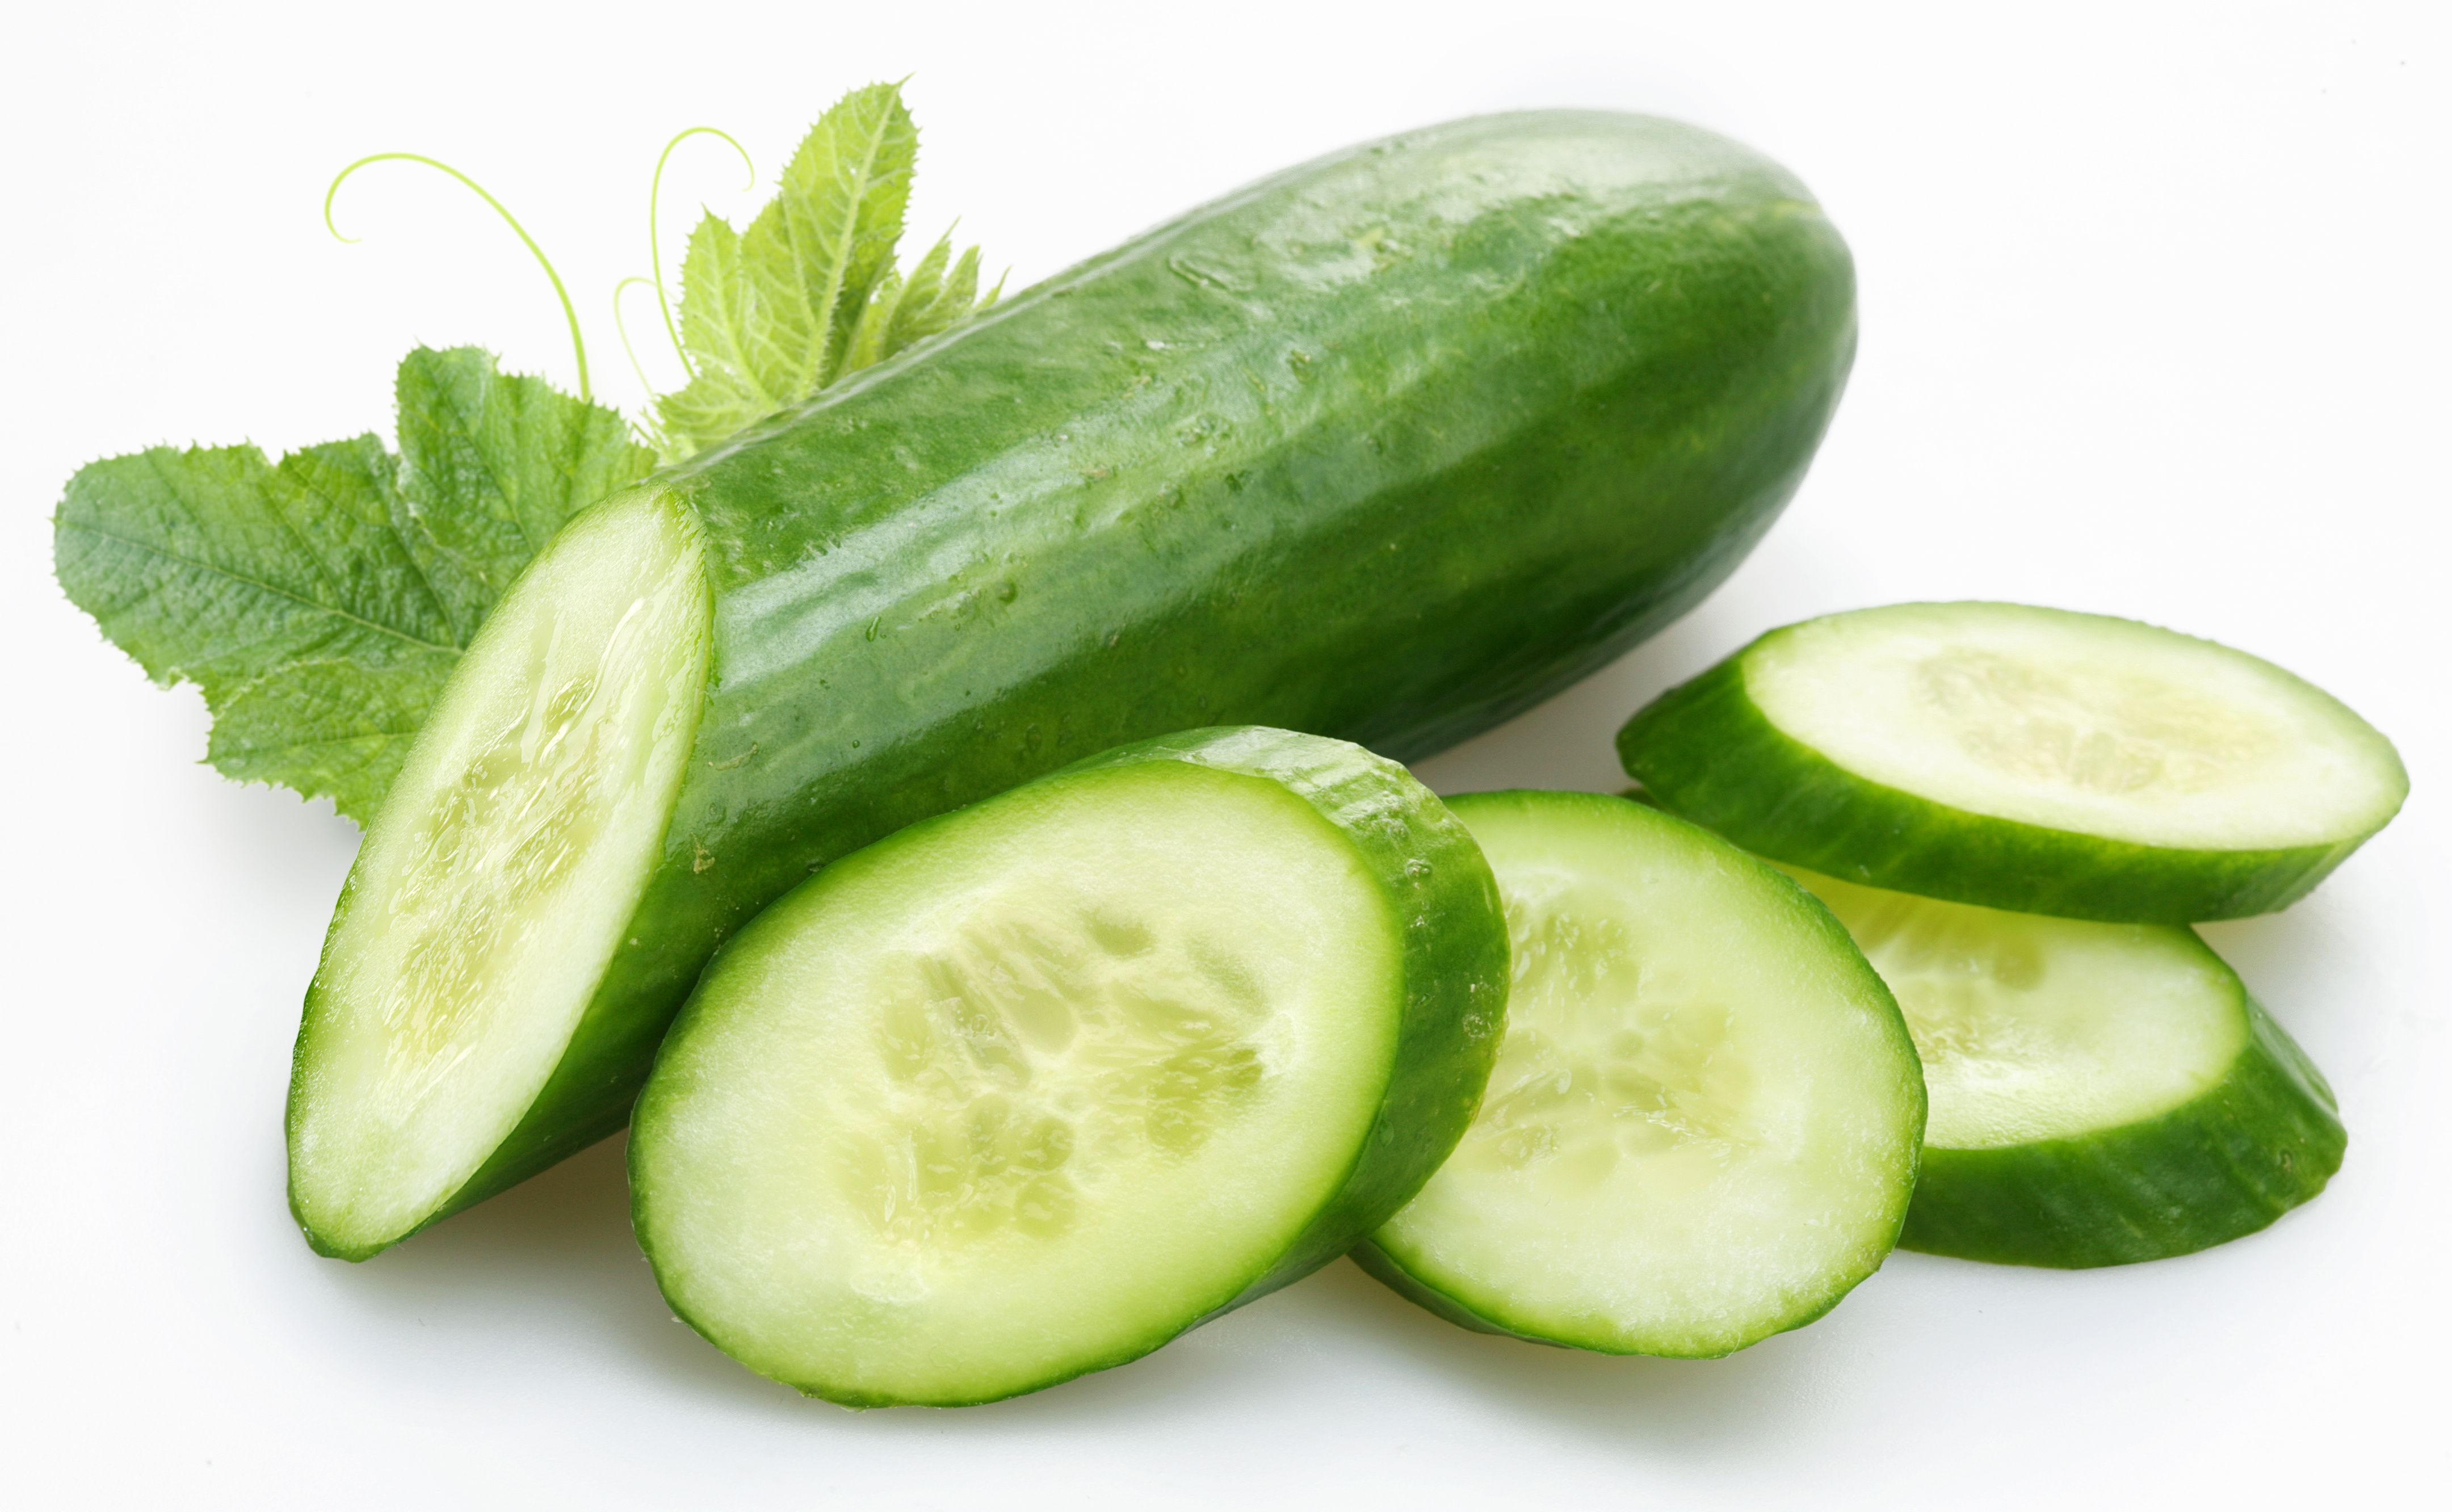 Is Cucumber a Fruit or a Vegetable?